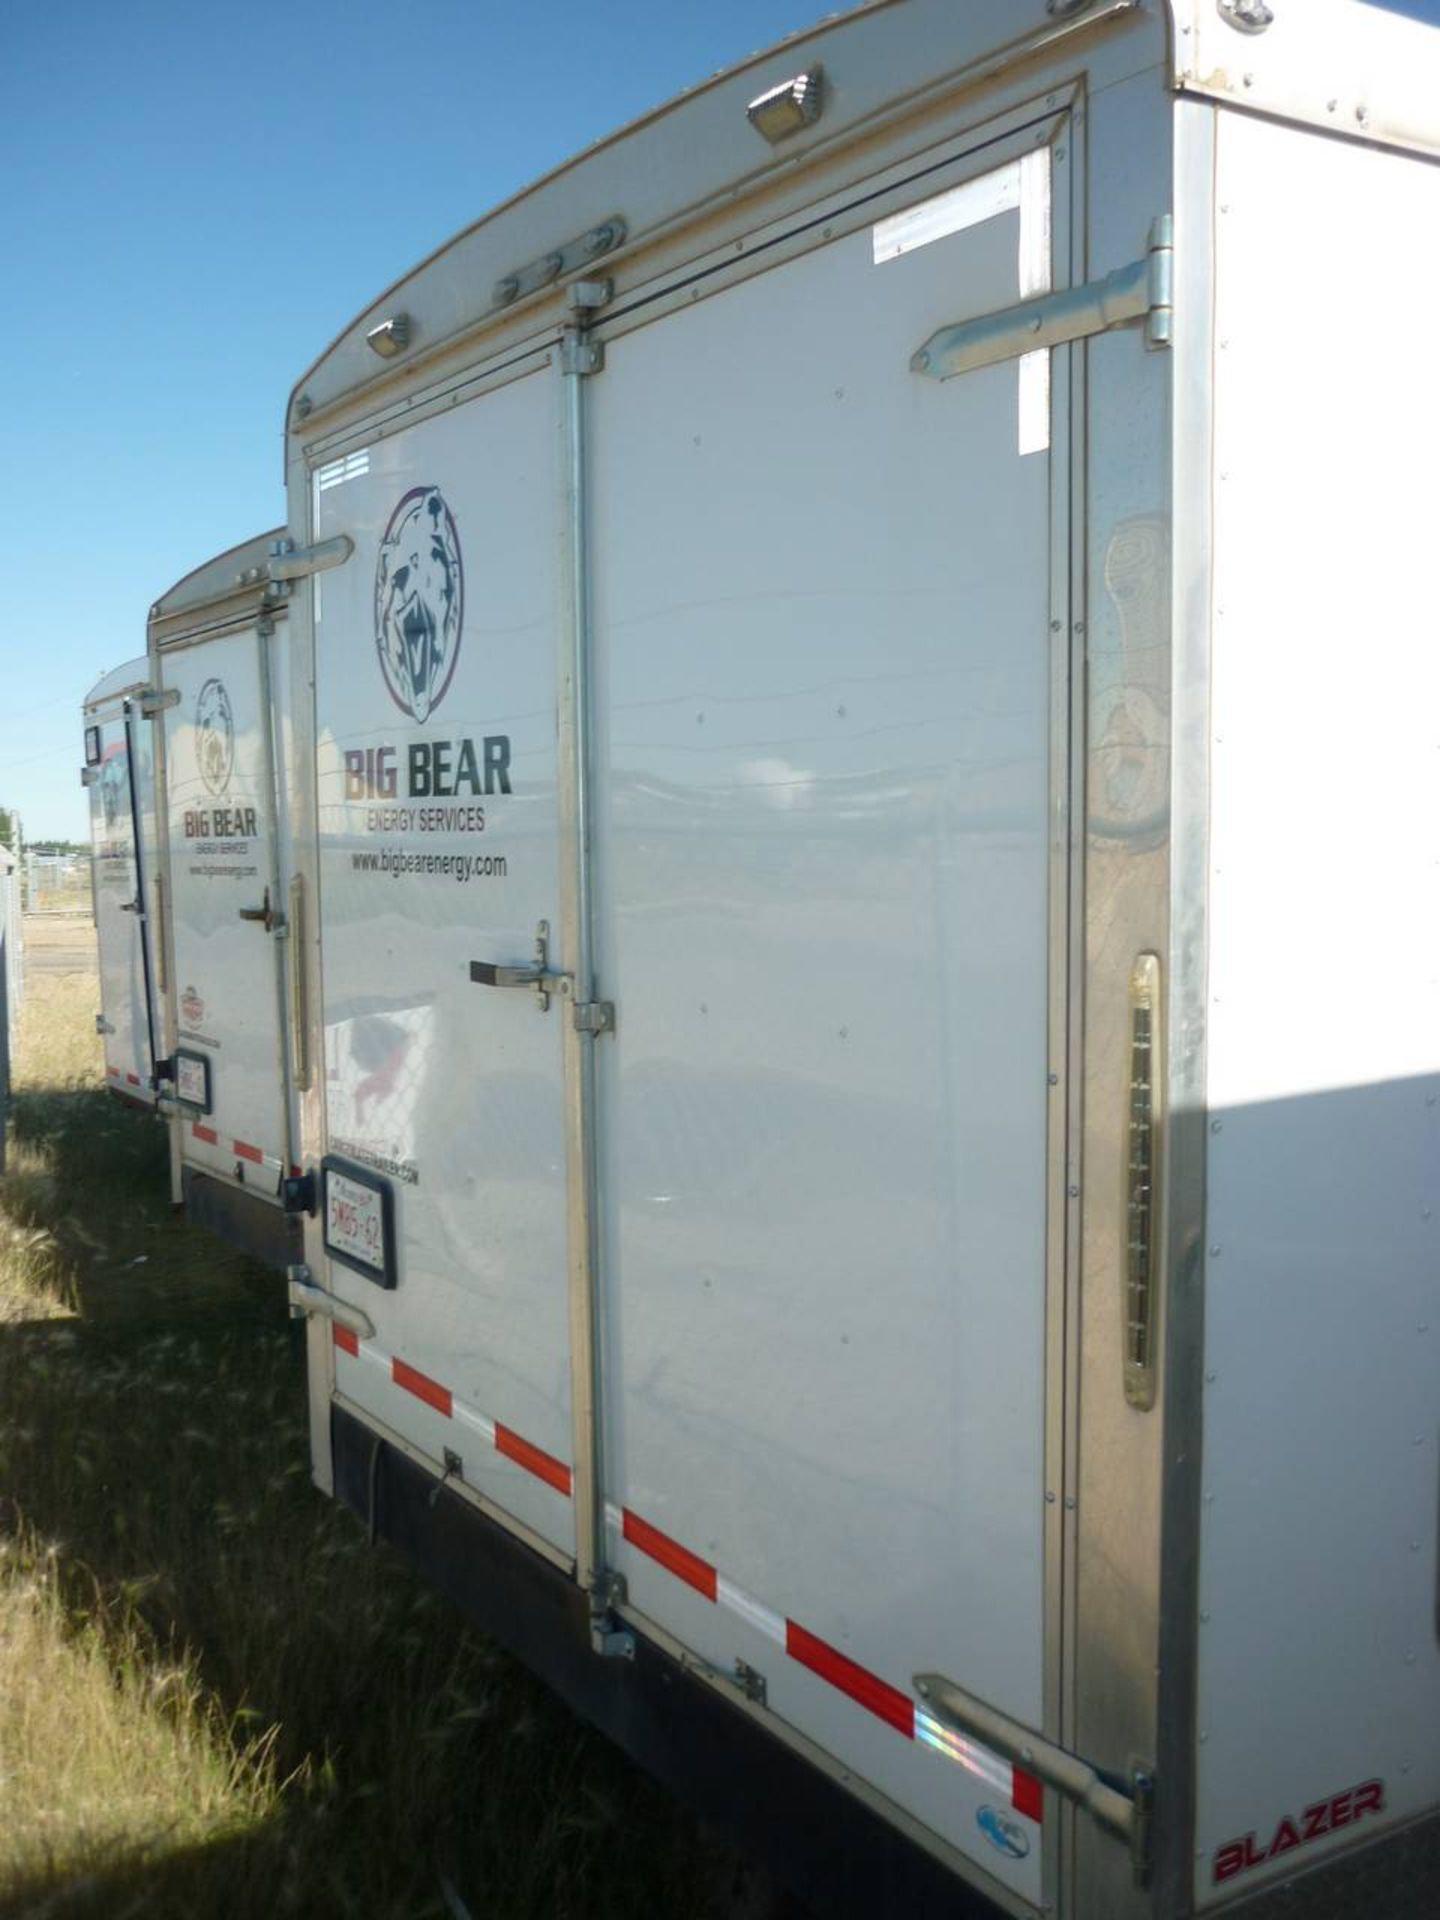 2018 Forest River ORBL824TA5 Enclosed trailer - Image 5 of 7